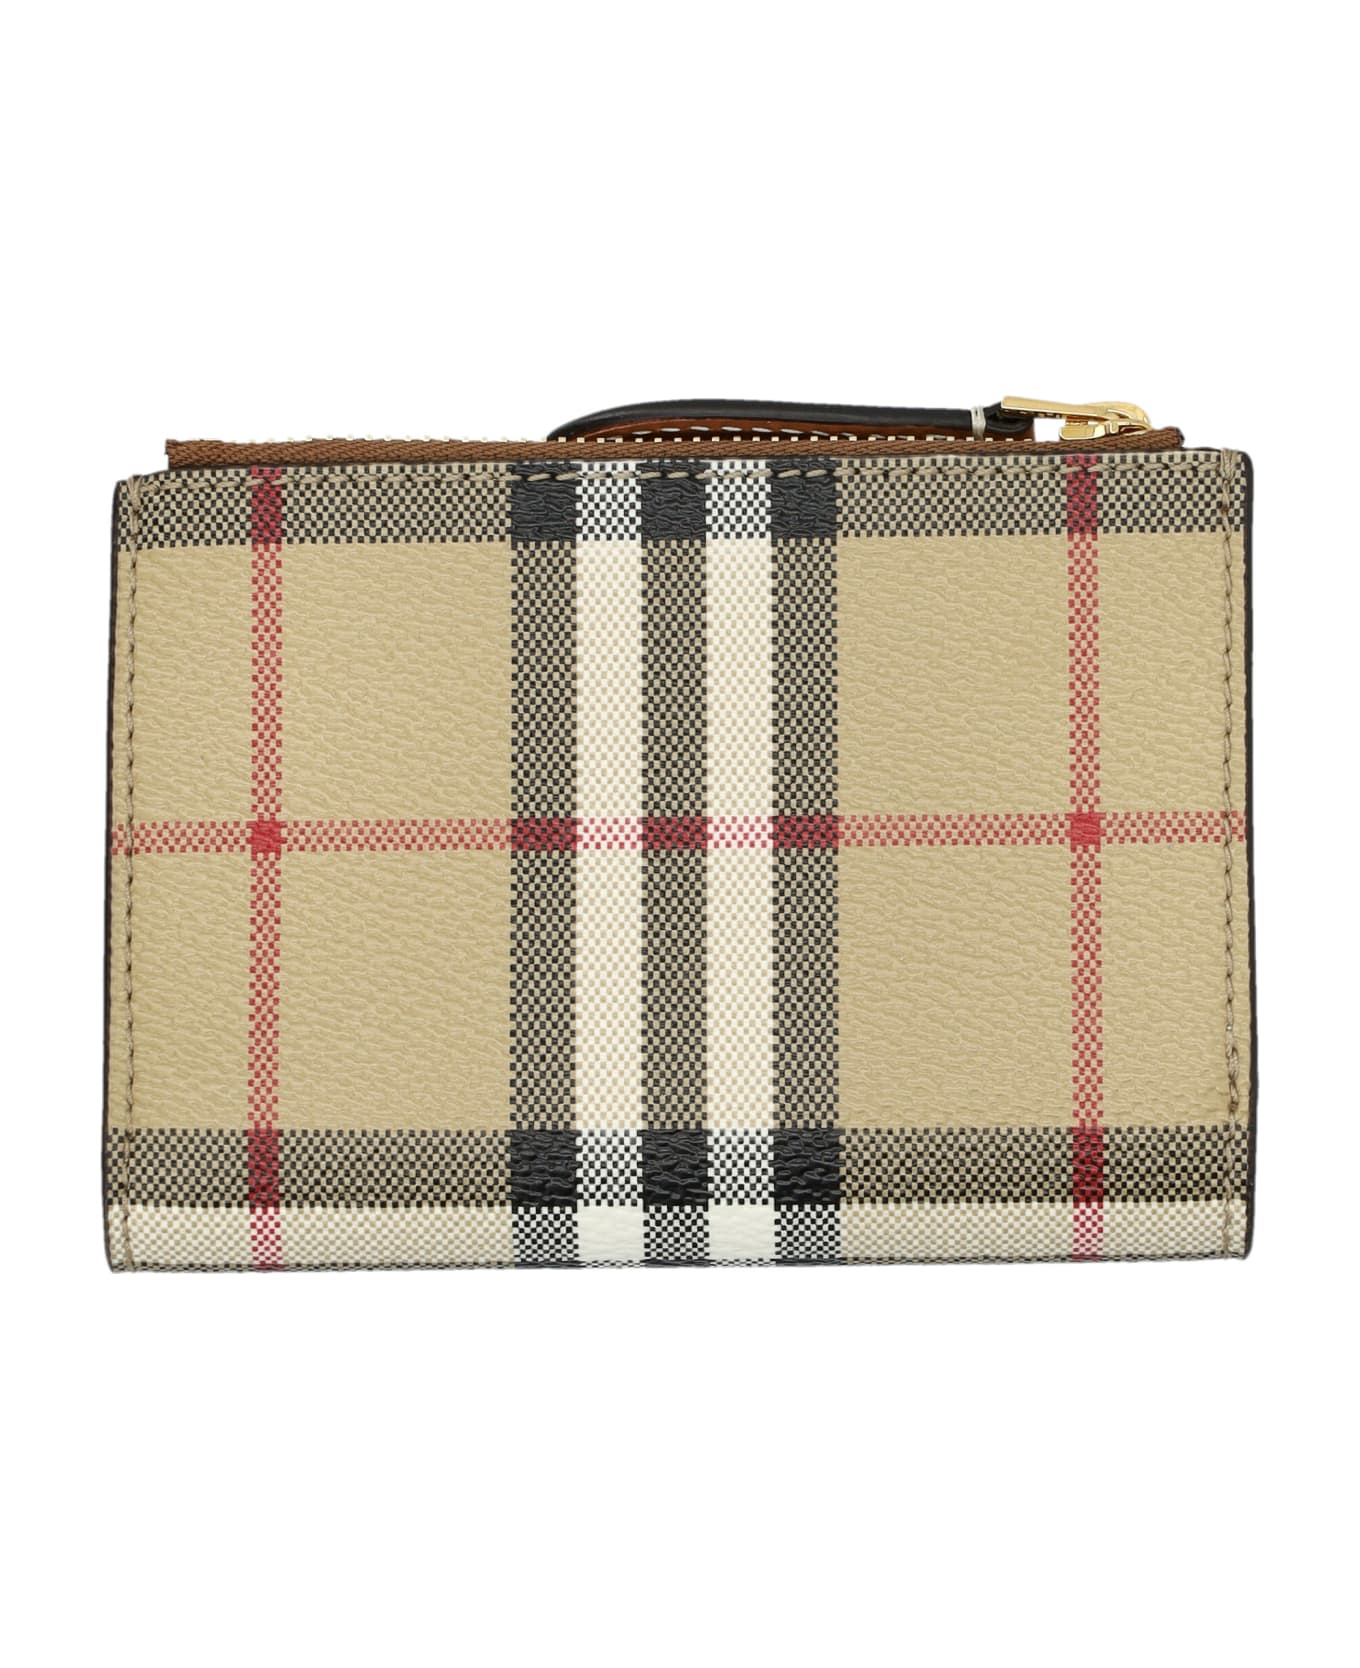 Burberry London Small Bifold Wallet - ARCHIVE BEIGE CHECK 財布